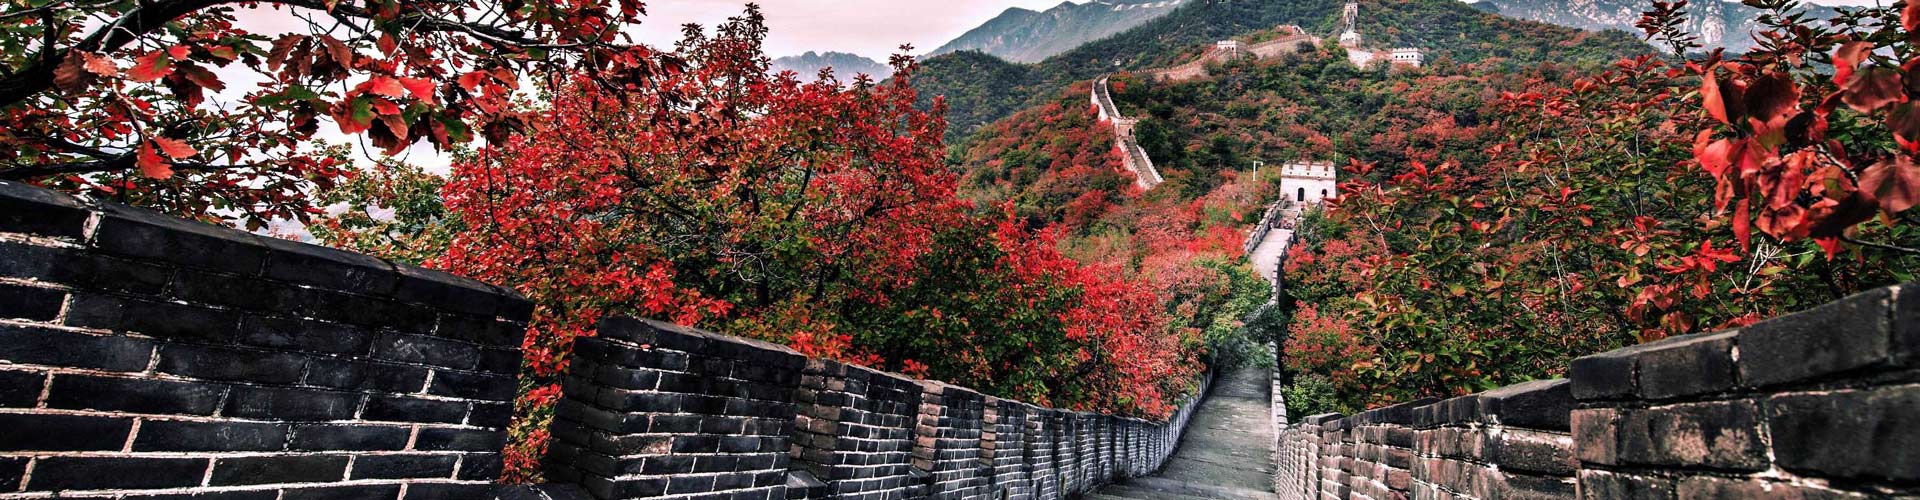 1 Day Tour: Mutianyu Great Wall and Ming Tomb